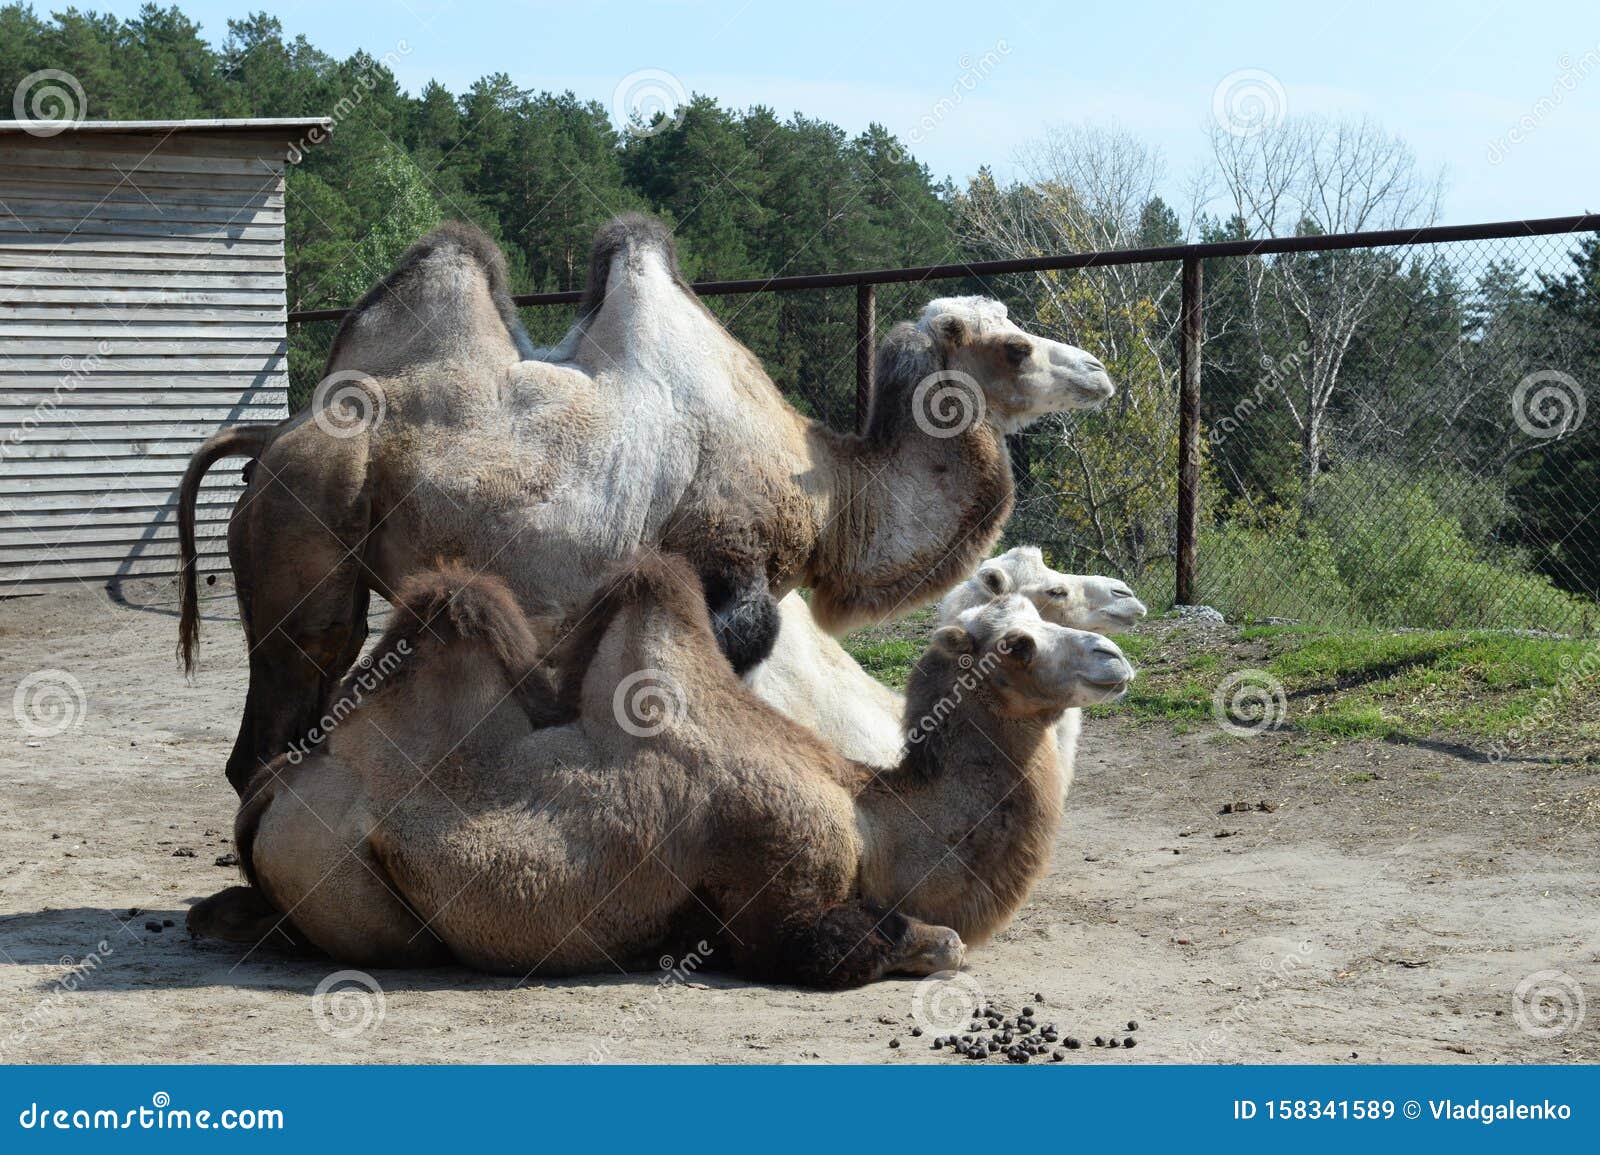 Bactrian Camels at the Ostrich Ranch Contact Zoo in Barnaul Stock Image ...